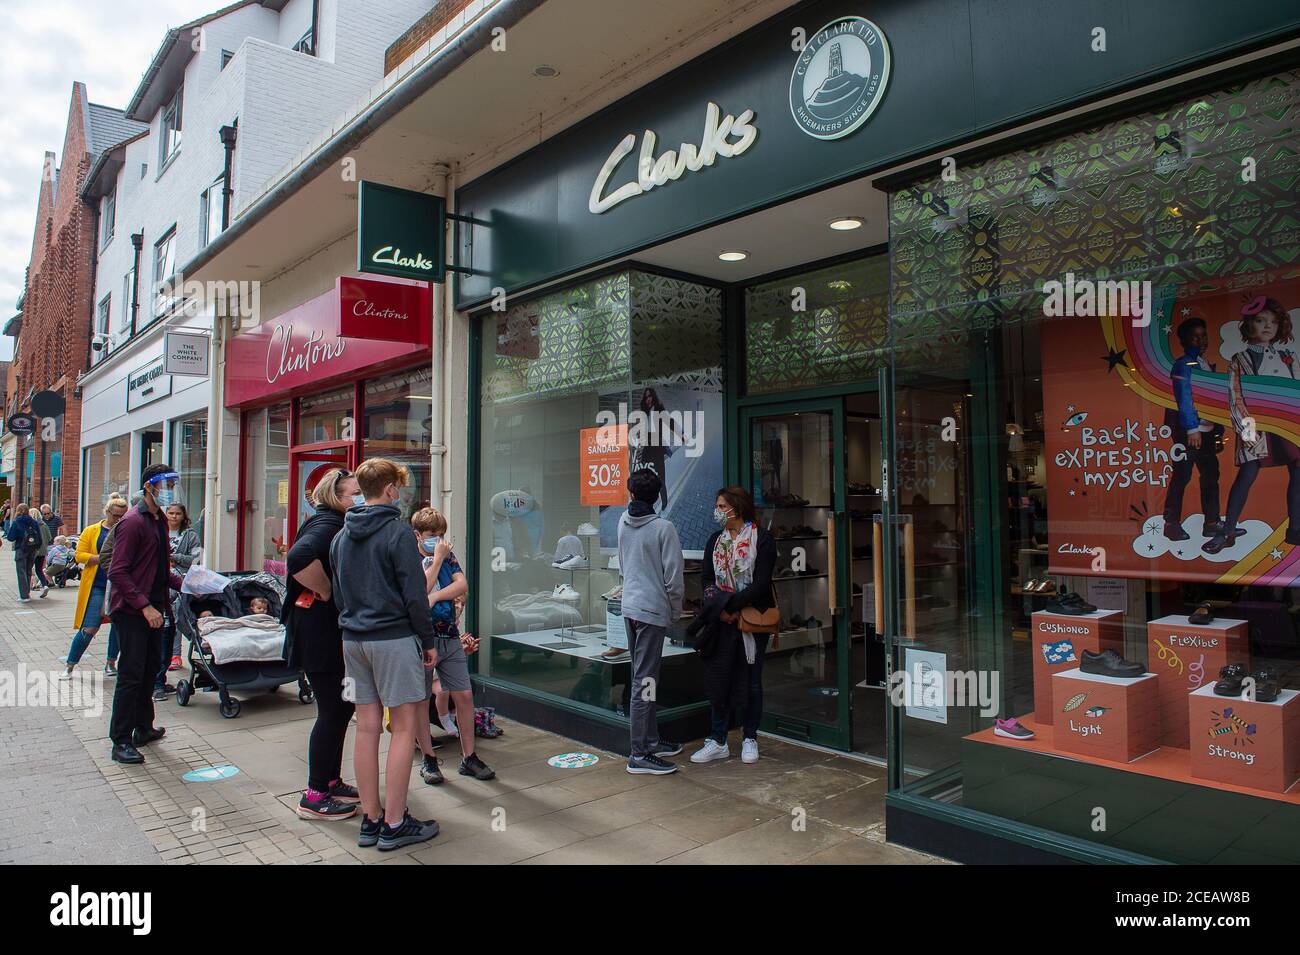 Clarks Shoe Shops High Resolution Stock Photography and Images - Alamy